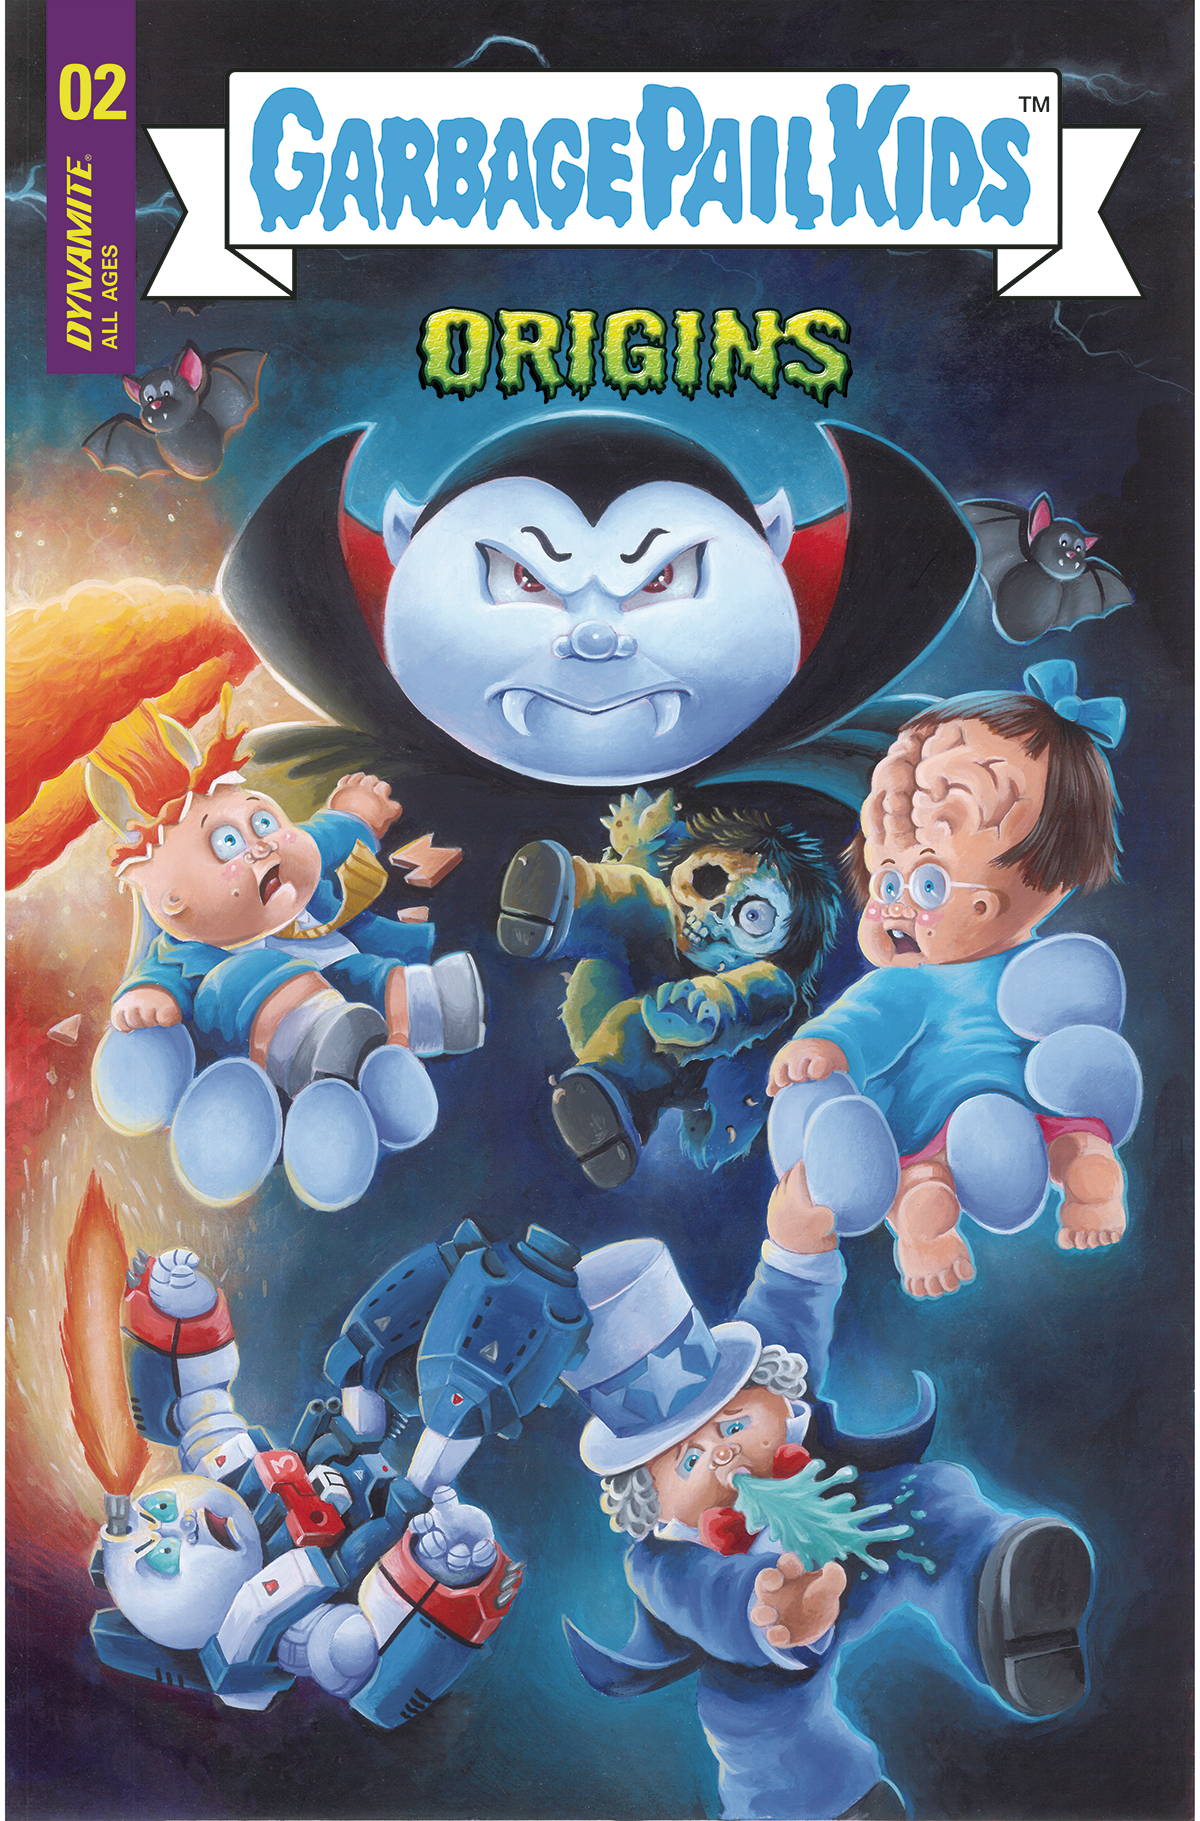 Garbage Pail Kids Origins #2 Cover E 1 for 10 Incentive Sharp Virgin